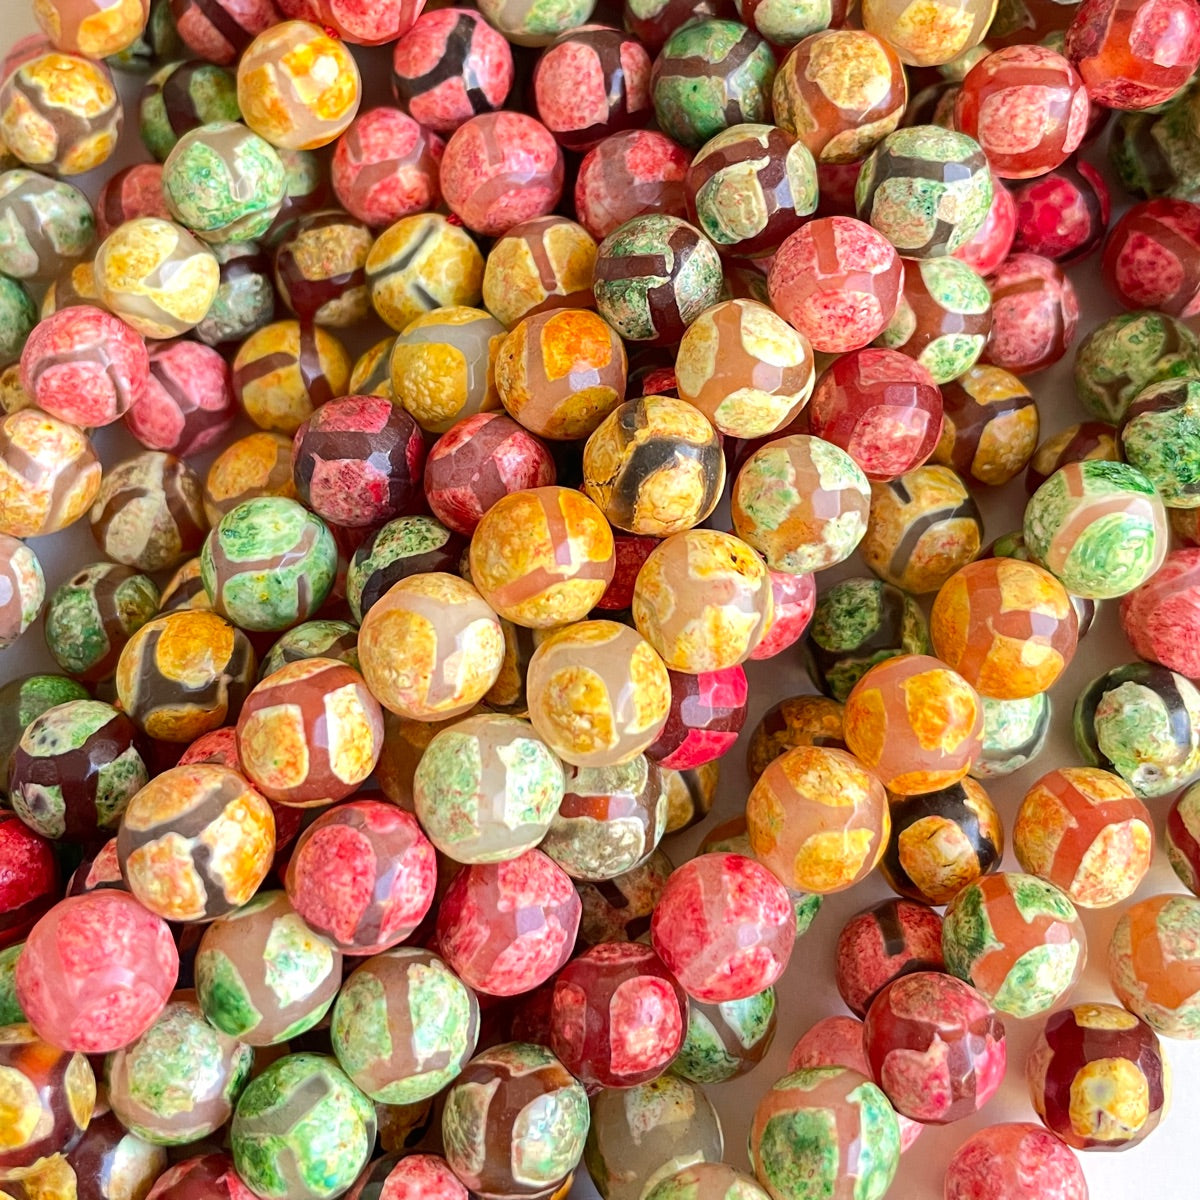 10mm Yellow Green Red Multicolor Tibetan Agate Faceted Stone Beads Stone Beads New Beads Arrivals Tibetan Beads Charms Beads Beyond